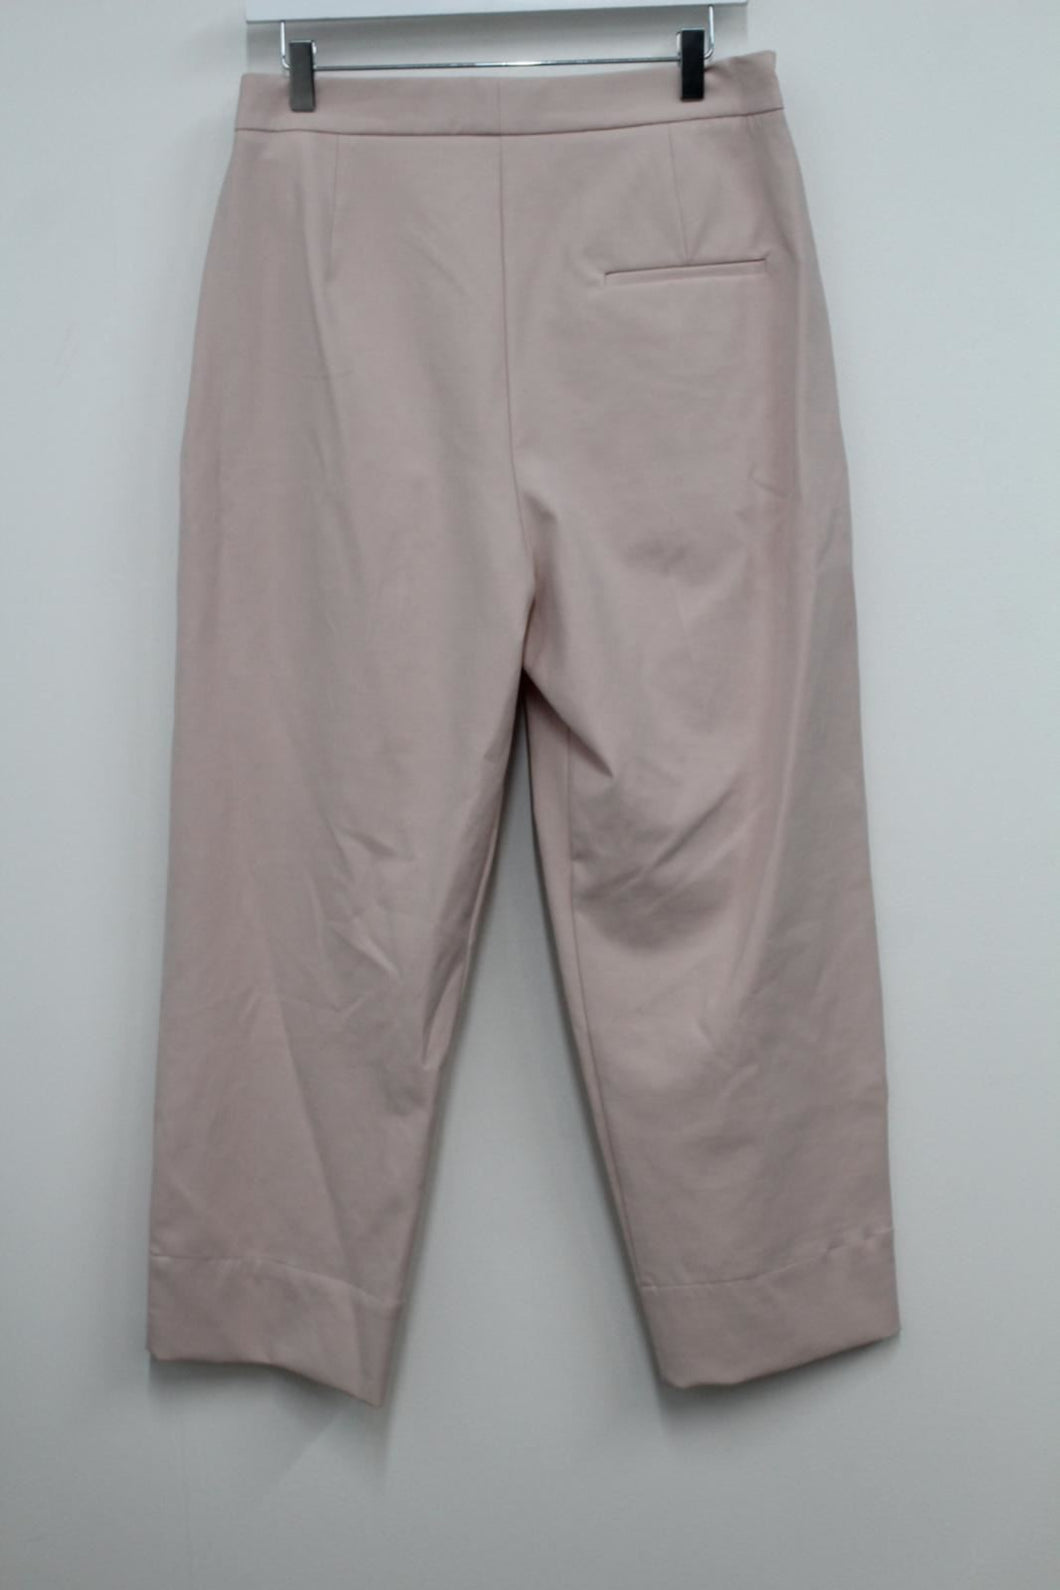 M&S Marks & Spencer Ladies Nude Pink Straight Trousers UK20 RRP39.5 NEW